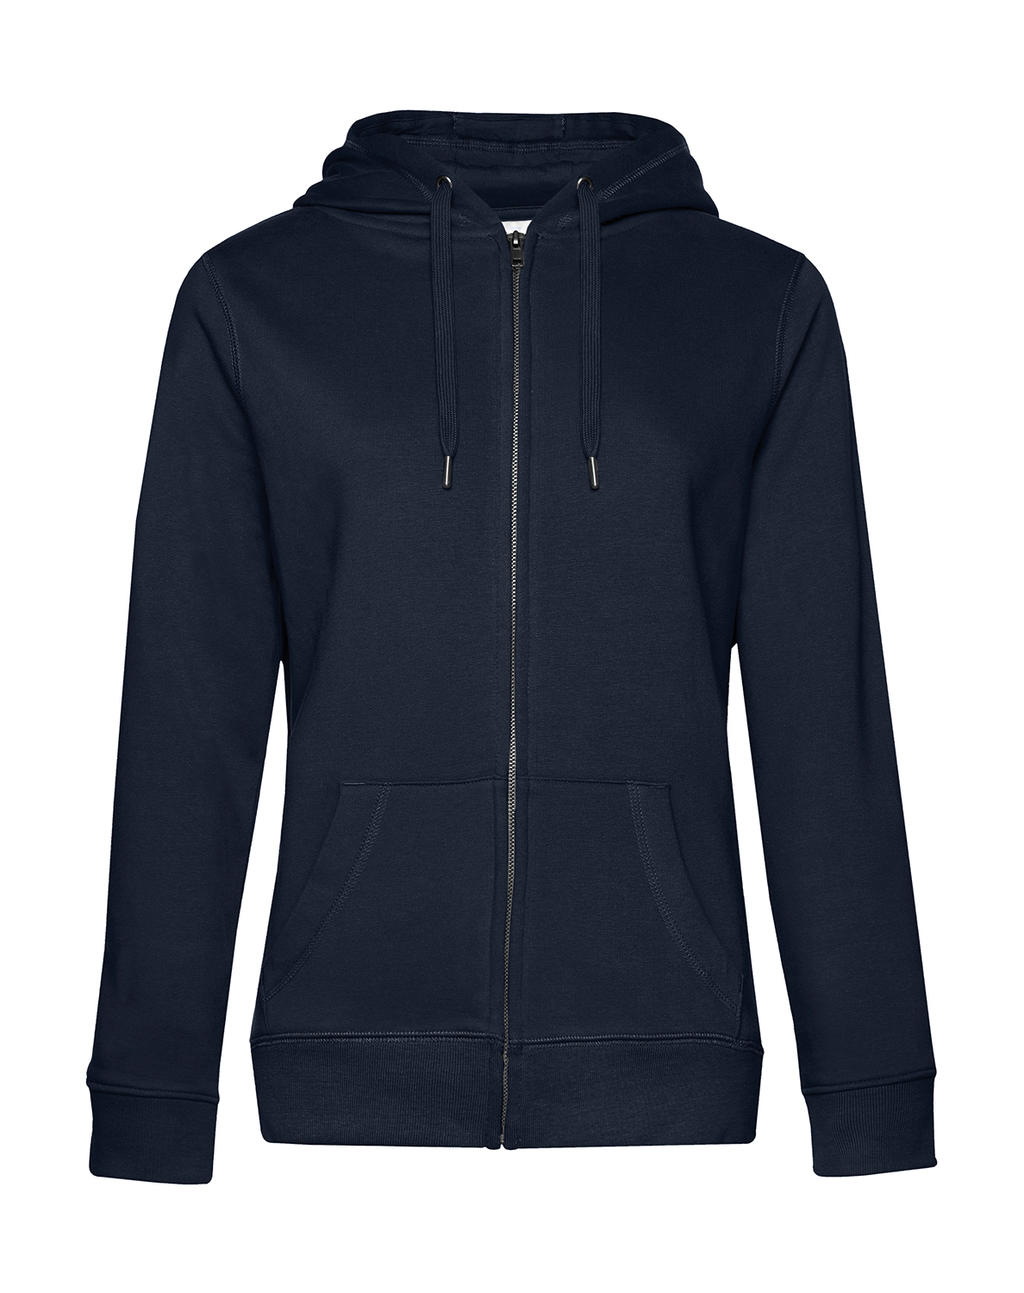  QUEEN Zipped Hood_? in Farbe Navy Blue